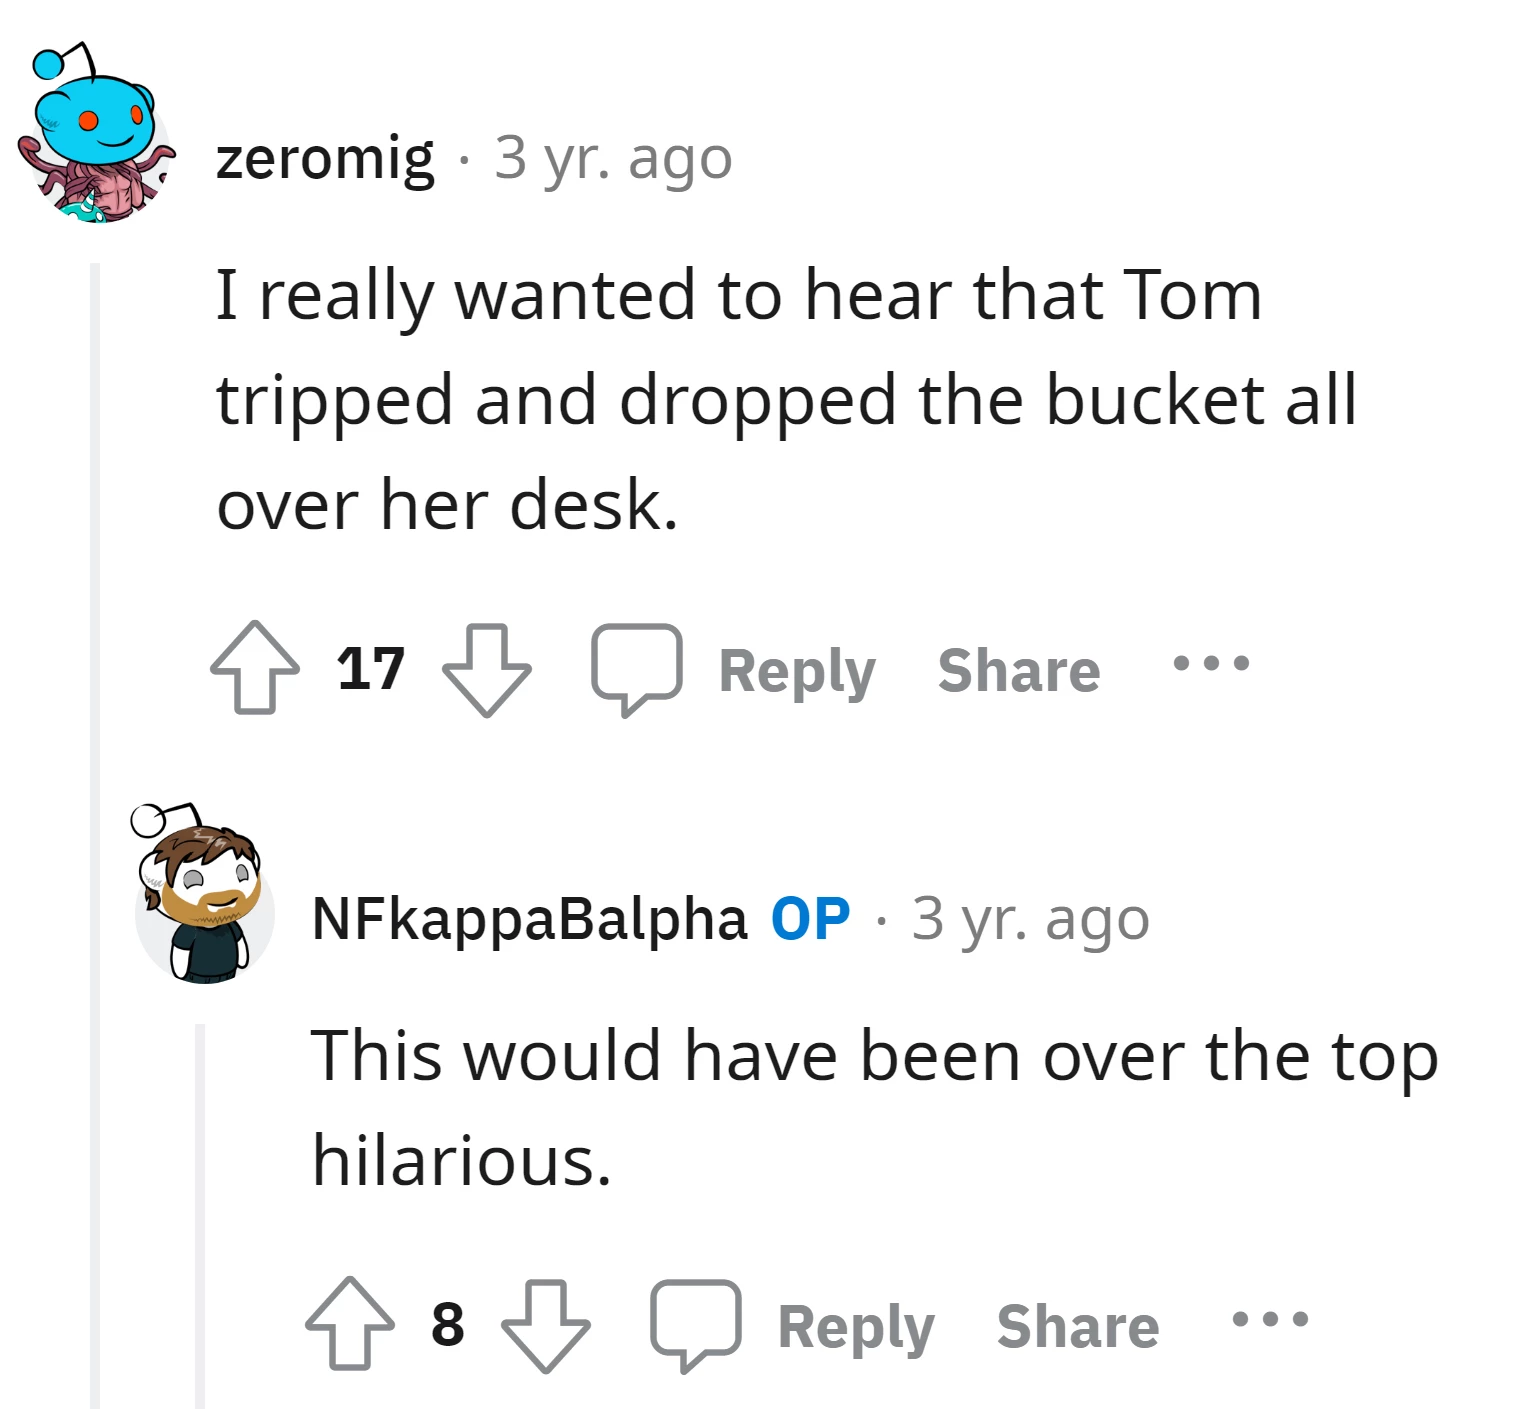 Well done Tom!